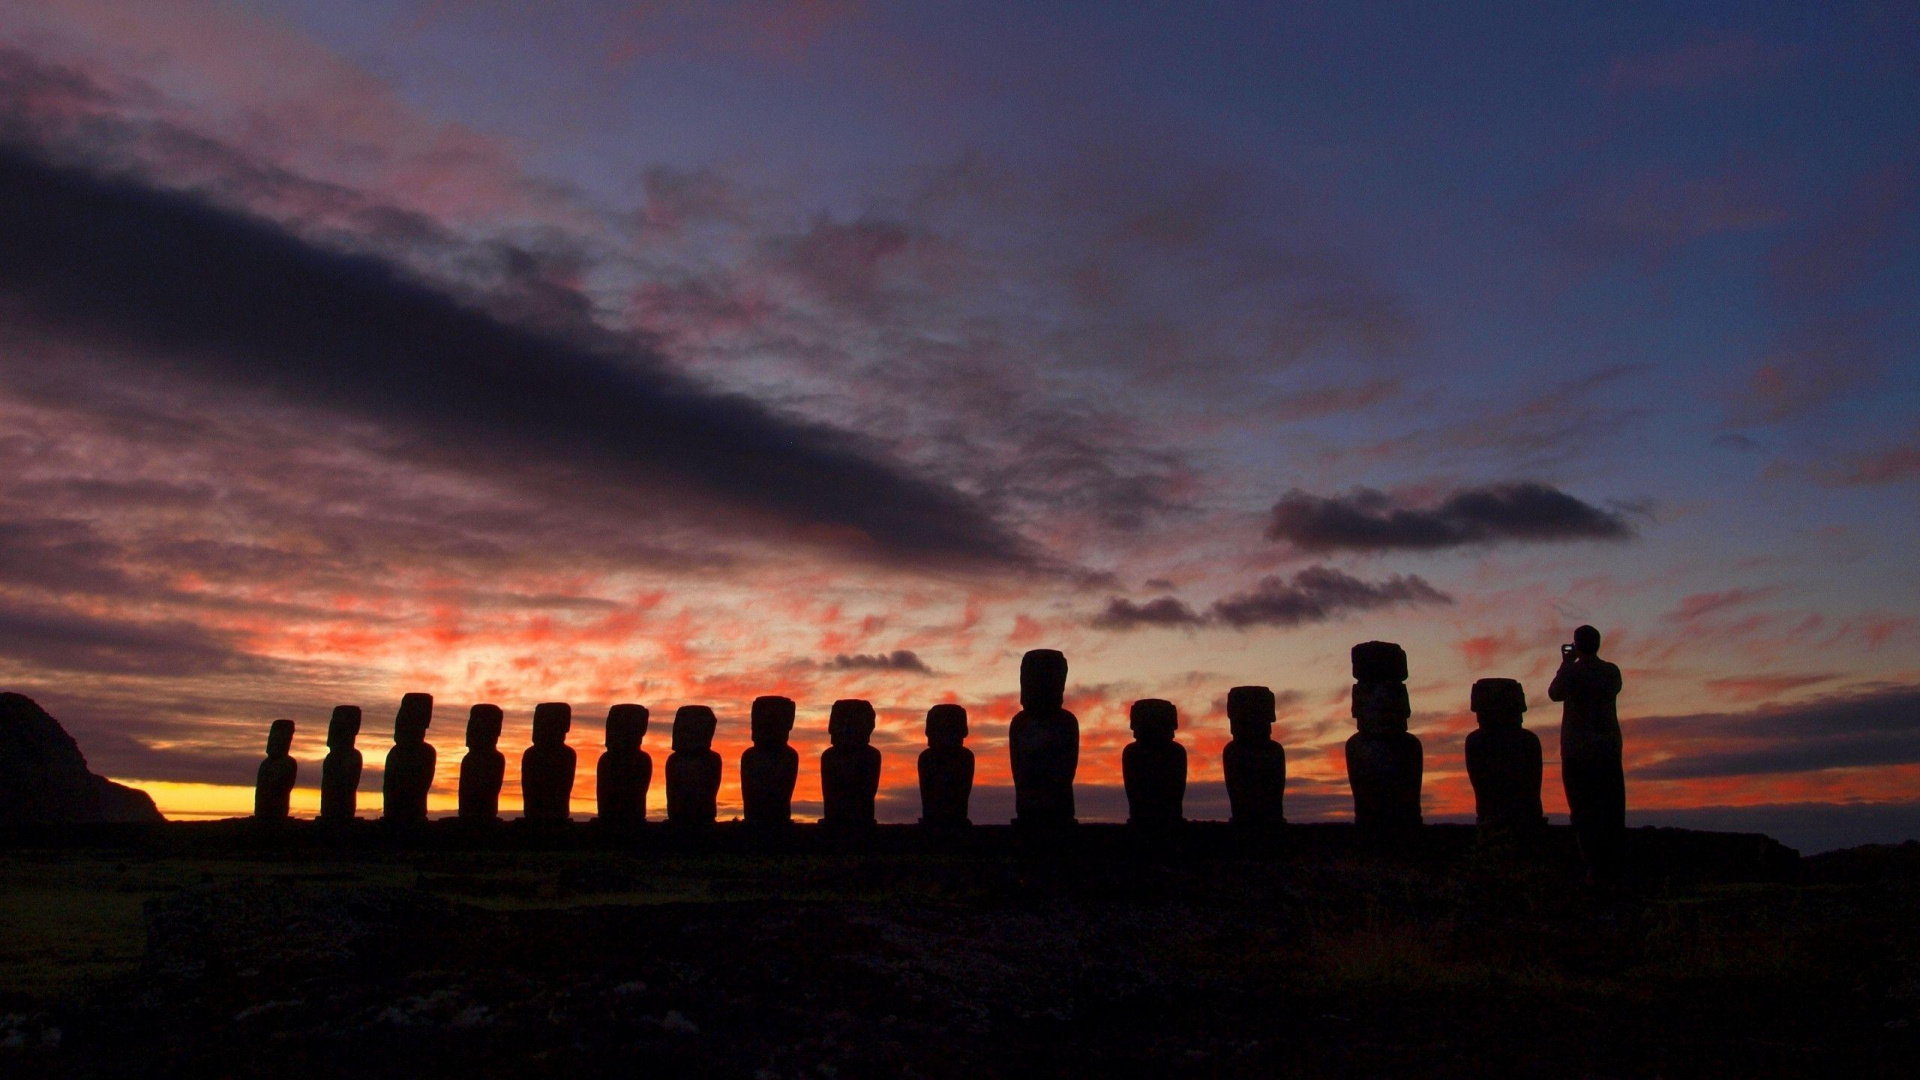 Dynamic Easter Island wallpapers, Immerse in nature, High-resolution images, Memorable landscapes, 1920x1080 Full HD Desktop